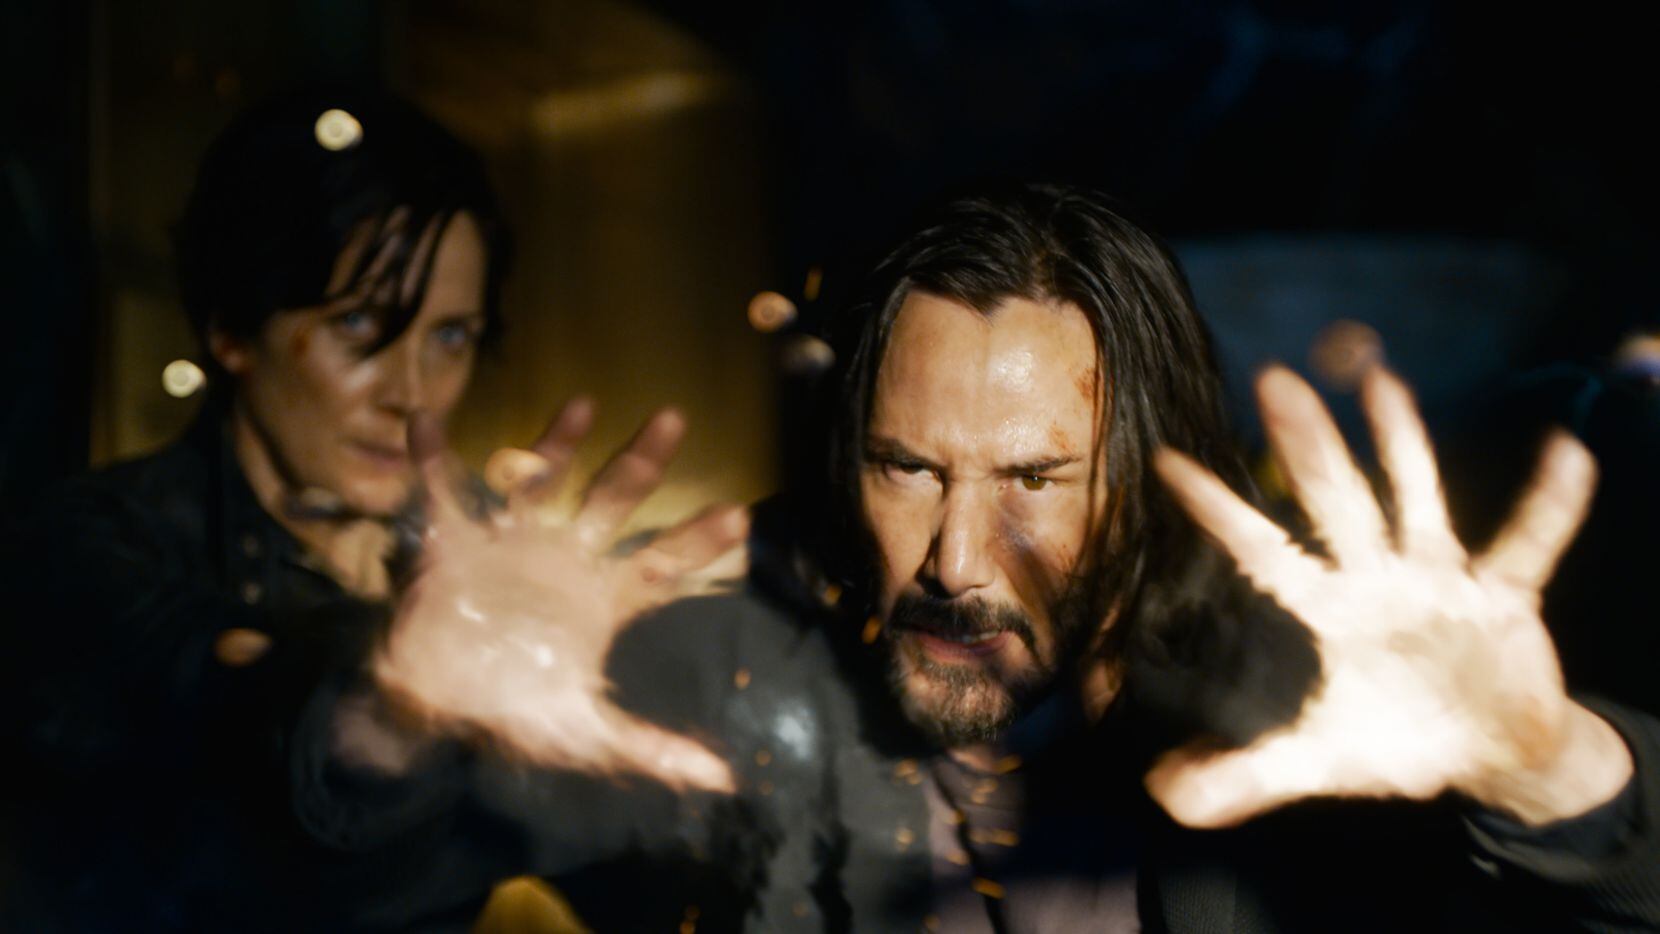 Keanu Reeves and Carrie-Anne Moss star in "The Matrix Resurrections."